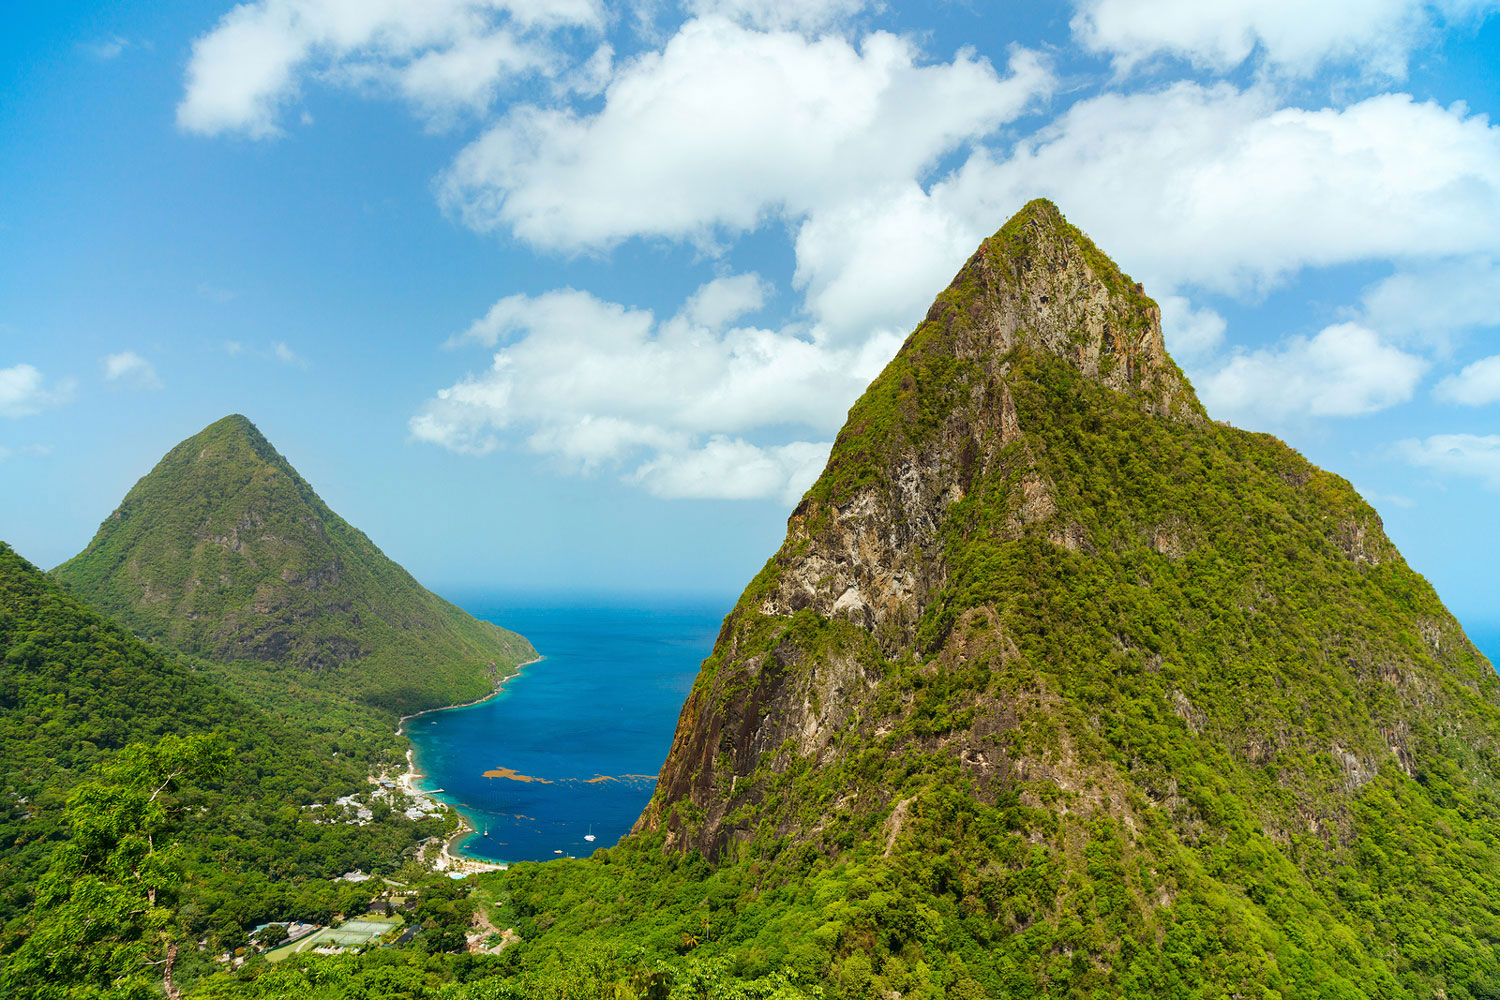 Iconic view of Piton mountains on St Lucia island in Caribbean.